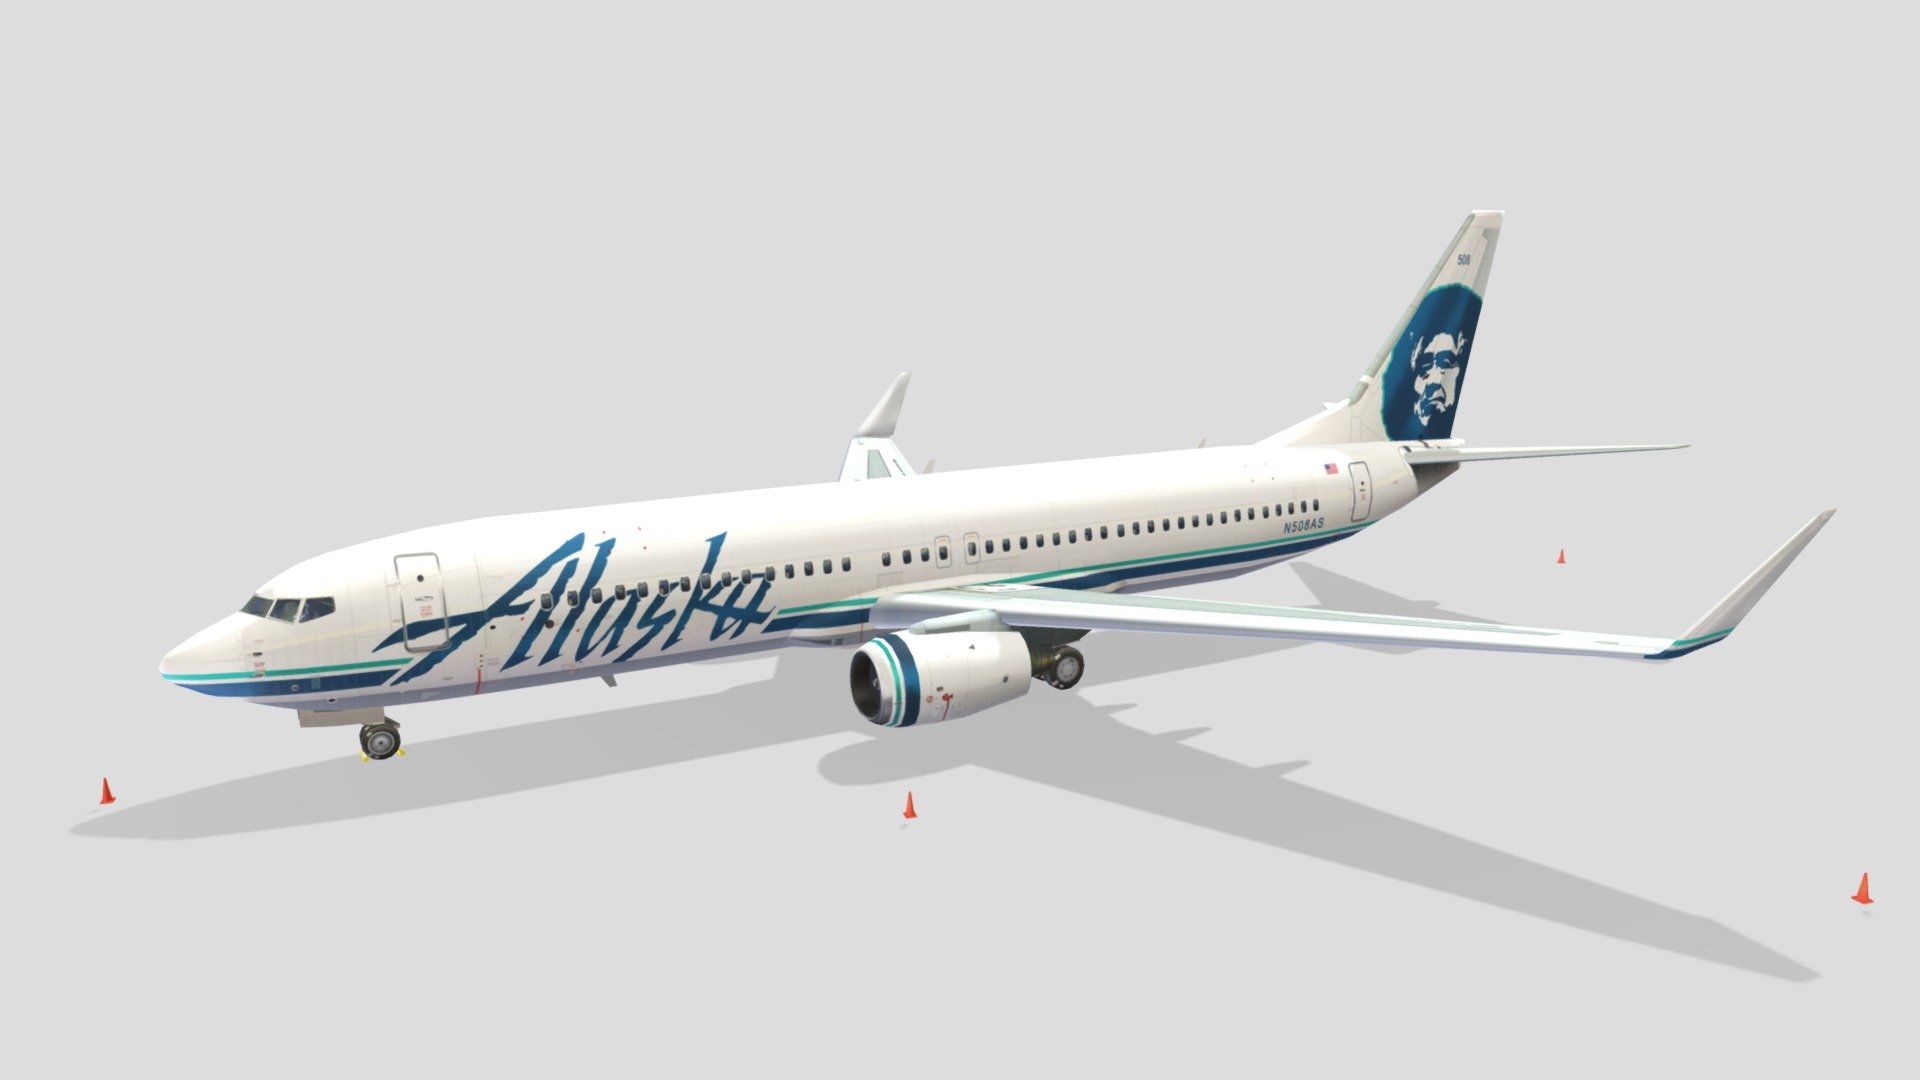 This is a 3D low-poly model of a Boeing 737-800, optimized for minimal complexity with less than 5000 polygons. Despite its low polygon count, the model accurately captures the iconic design and aerodynamic features of the Boeing 737-400, making it ideal for real-time rendering in games or simulations.

The model comes with a blank layered texture, providing a clean slate for customization. This allows you to apply your own color schemes, decals, or airline branding. The layered structure of the texture file offers flexibility in modifying different parts of the aircraft separately, such as the fuselage, wings, engines, and tail.

simplicity, accuracy, and customizability, making it a versatile asset for any 3D project. This model is available in Sketchfab, CGTrader and Artstation, thanks for looking! dont forget to check my other models - Boeing 737-800 B738 Lowpoly Alaska Airlines - Buy Royalty Free 3D model by hangarcerouno 3d model